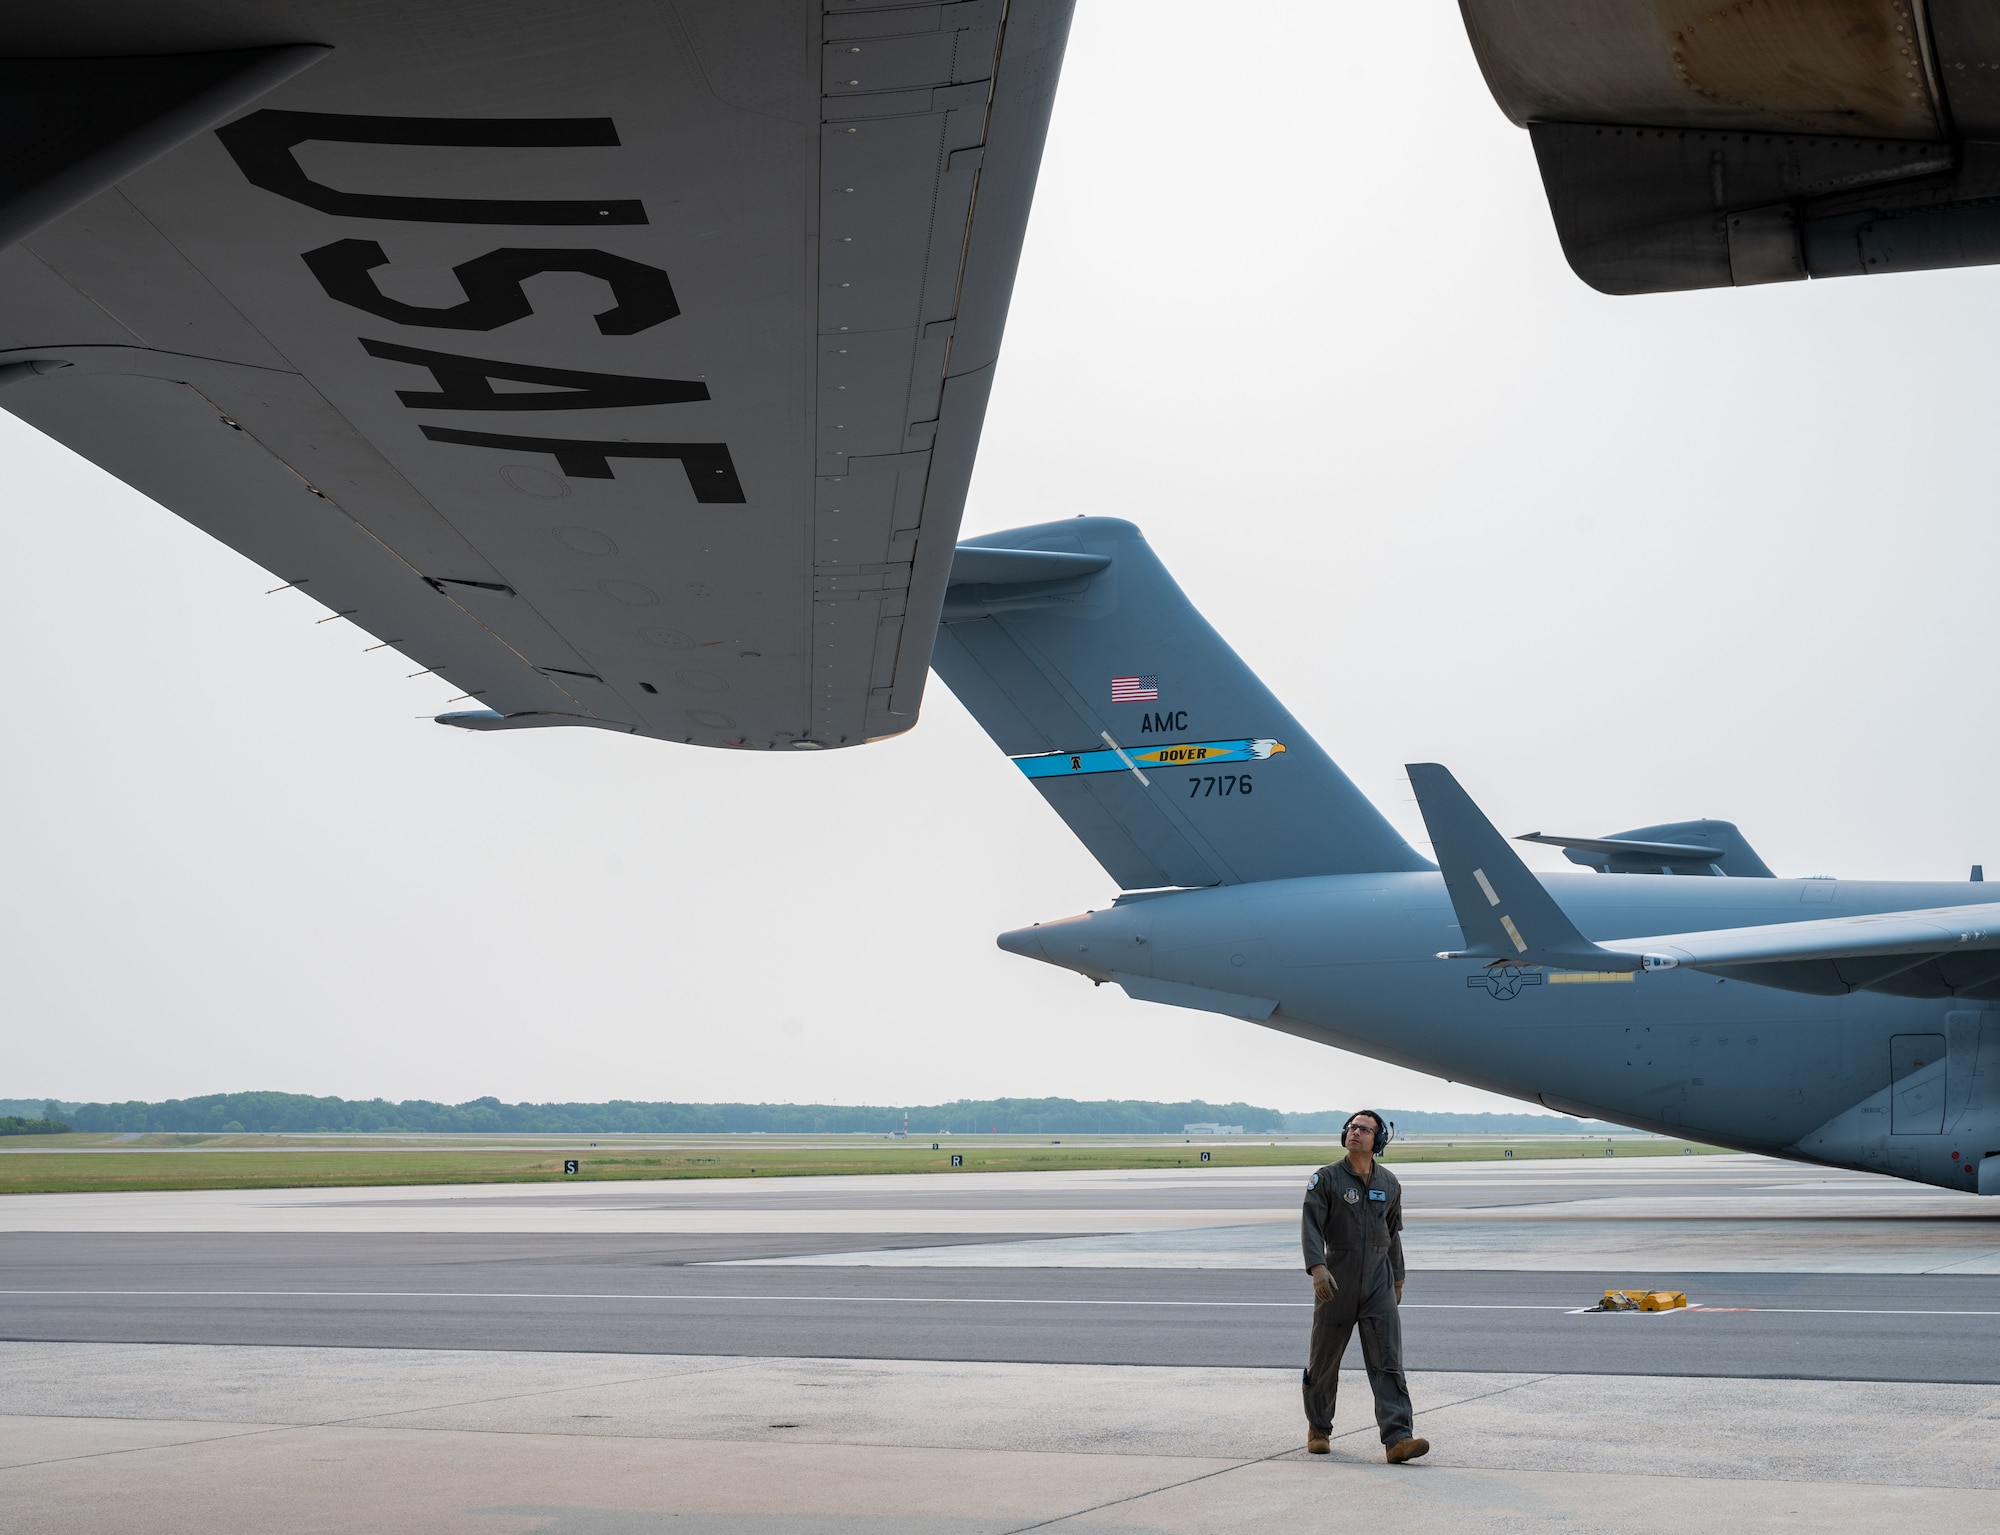 Lt. Col. Ryan Cox, 326th Airlift Squadron pilot, visually inspects the left wing of a C-17 Globemaster III as part of a preflight inspection during the 2023 hurricane evacuation exercise at Dover Air Force Base, Delaware, June 6, 2023. The C-17 was one of six Globemaster IIIs that departed Dover AFB during the hurricane evacuation exercise. (U.S. Air Force photo by Airman 1st Class Amanda Jett)